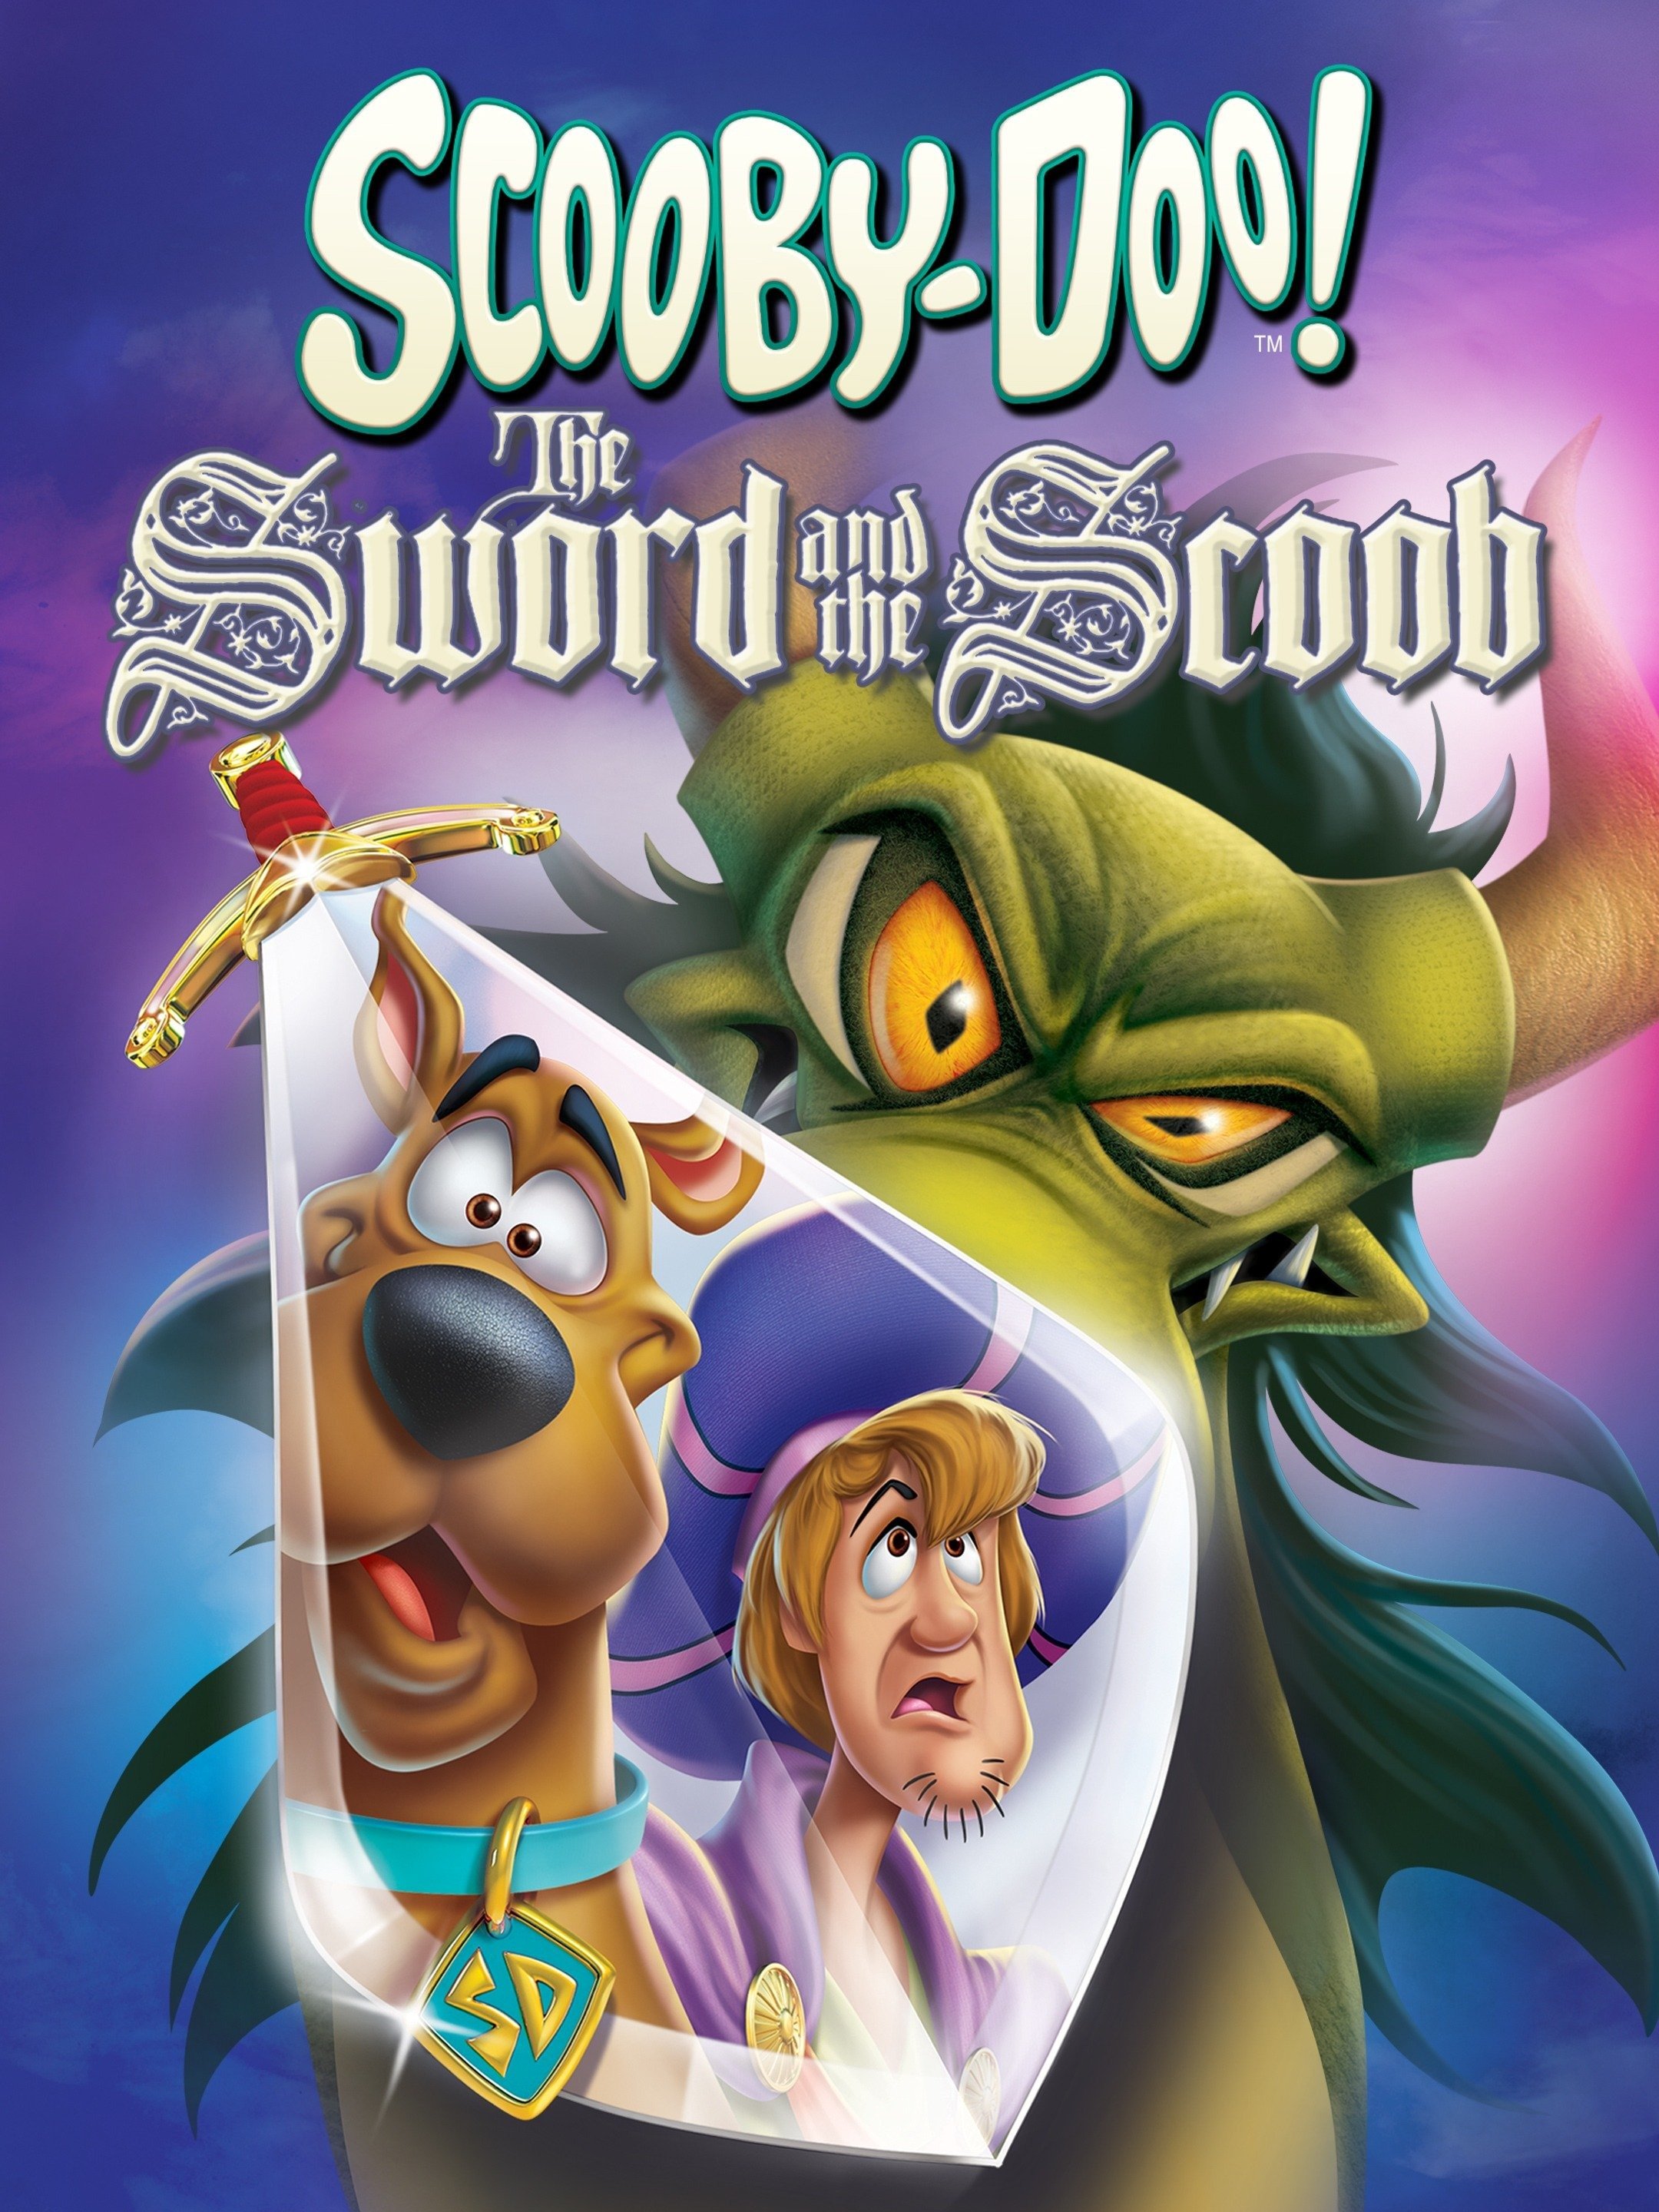 Scooby-Doo! The Sword and the Scoob (2021) - Rotten Tomatoes